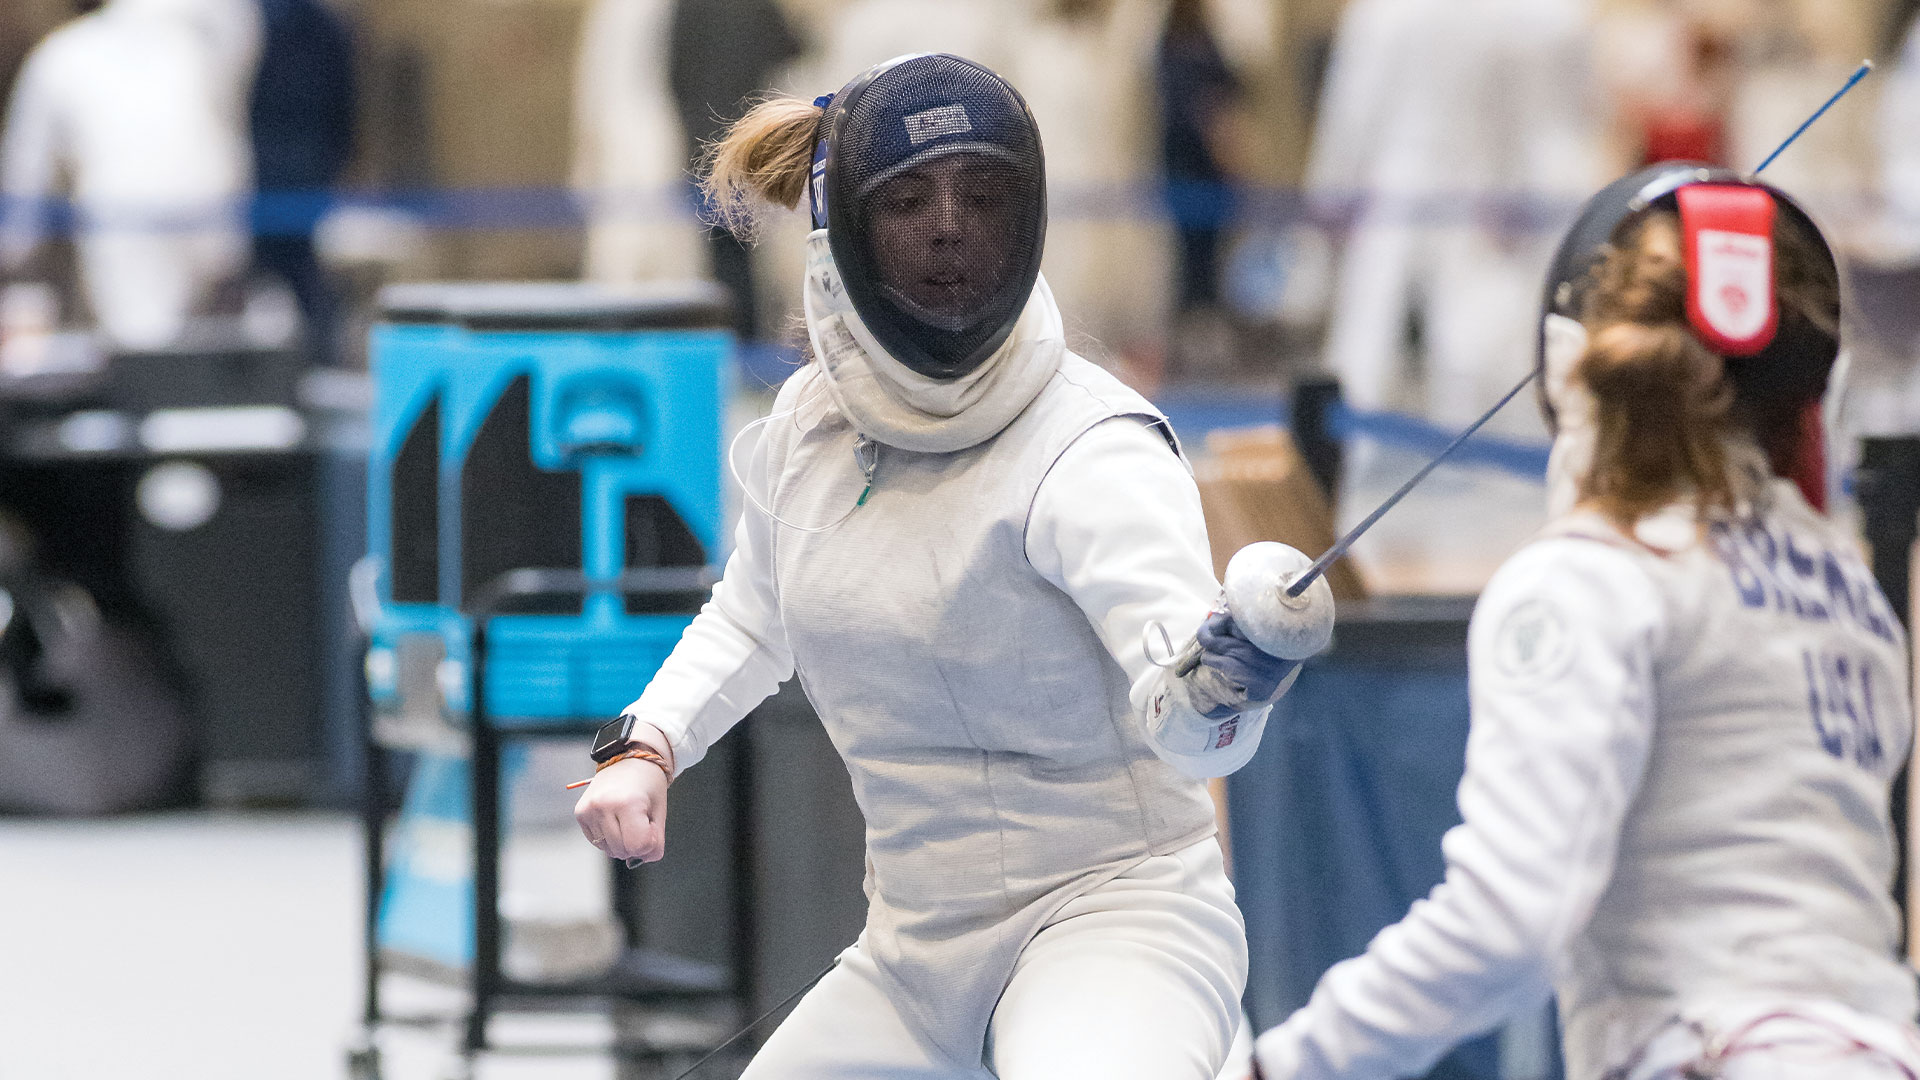 Blue fencing goes 4-1 at NFC Conference Meet No. 3 (Frank Poulin Photography)